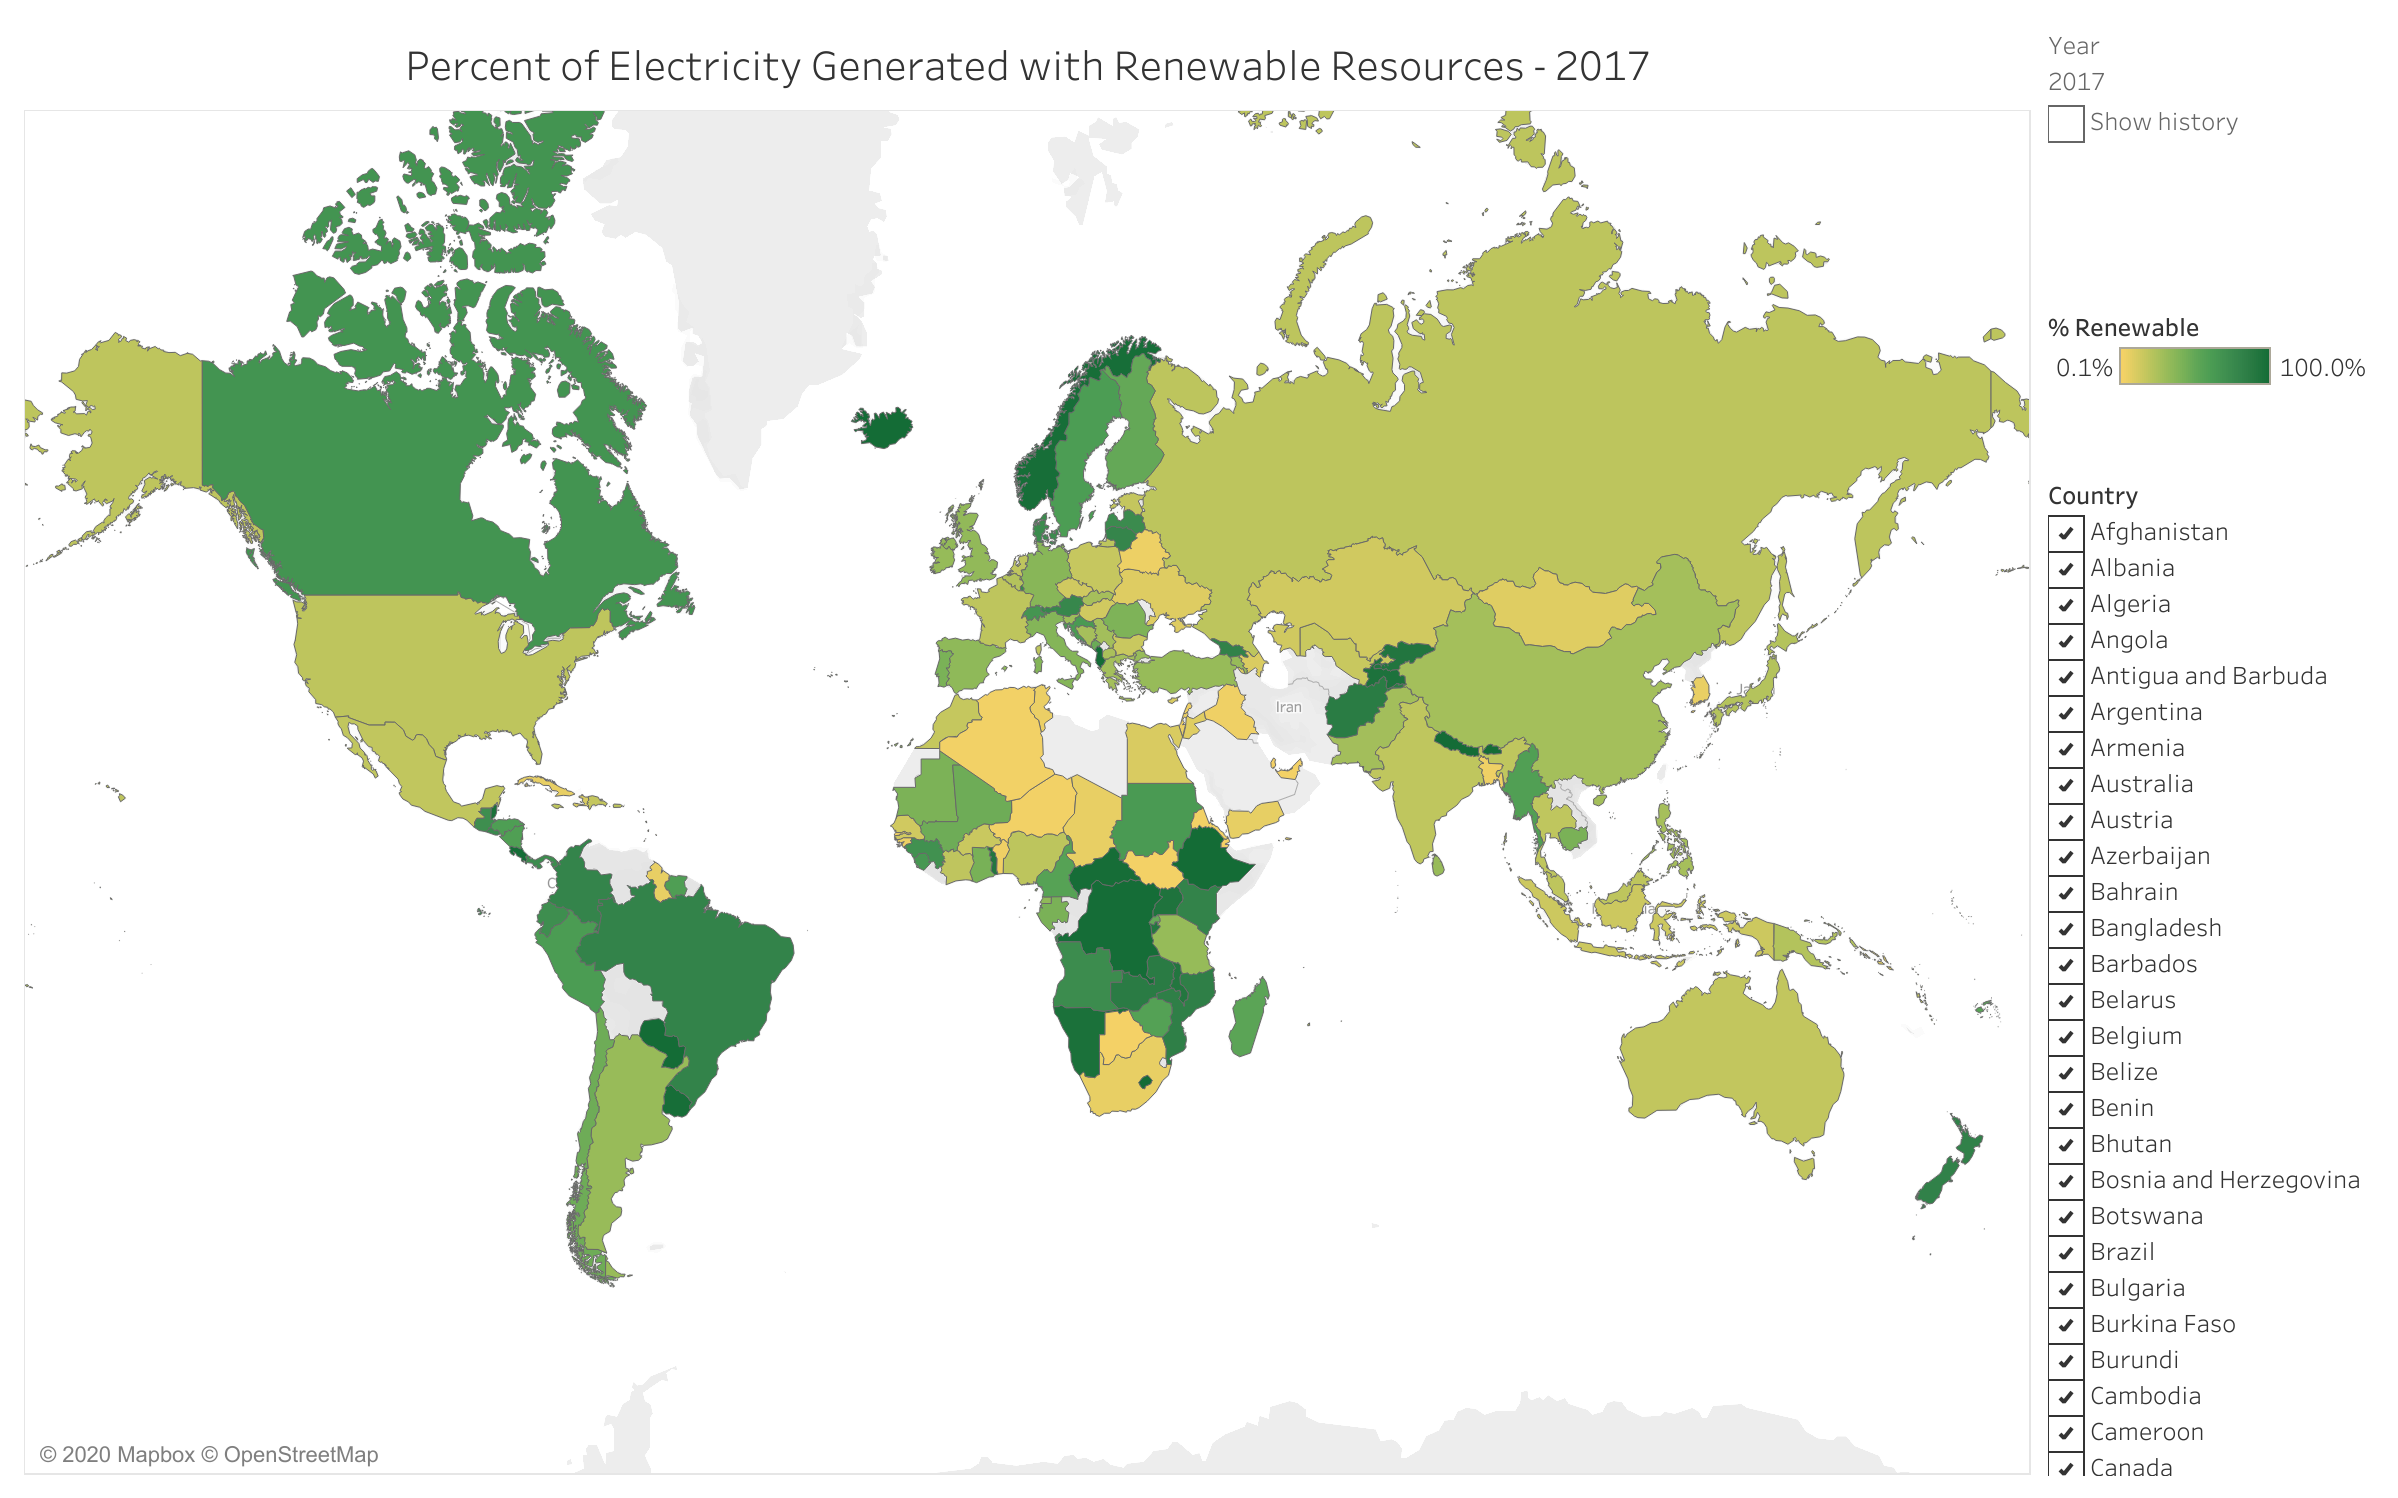 Percentage of Renewable Electricity From 1980 to 2017